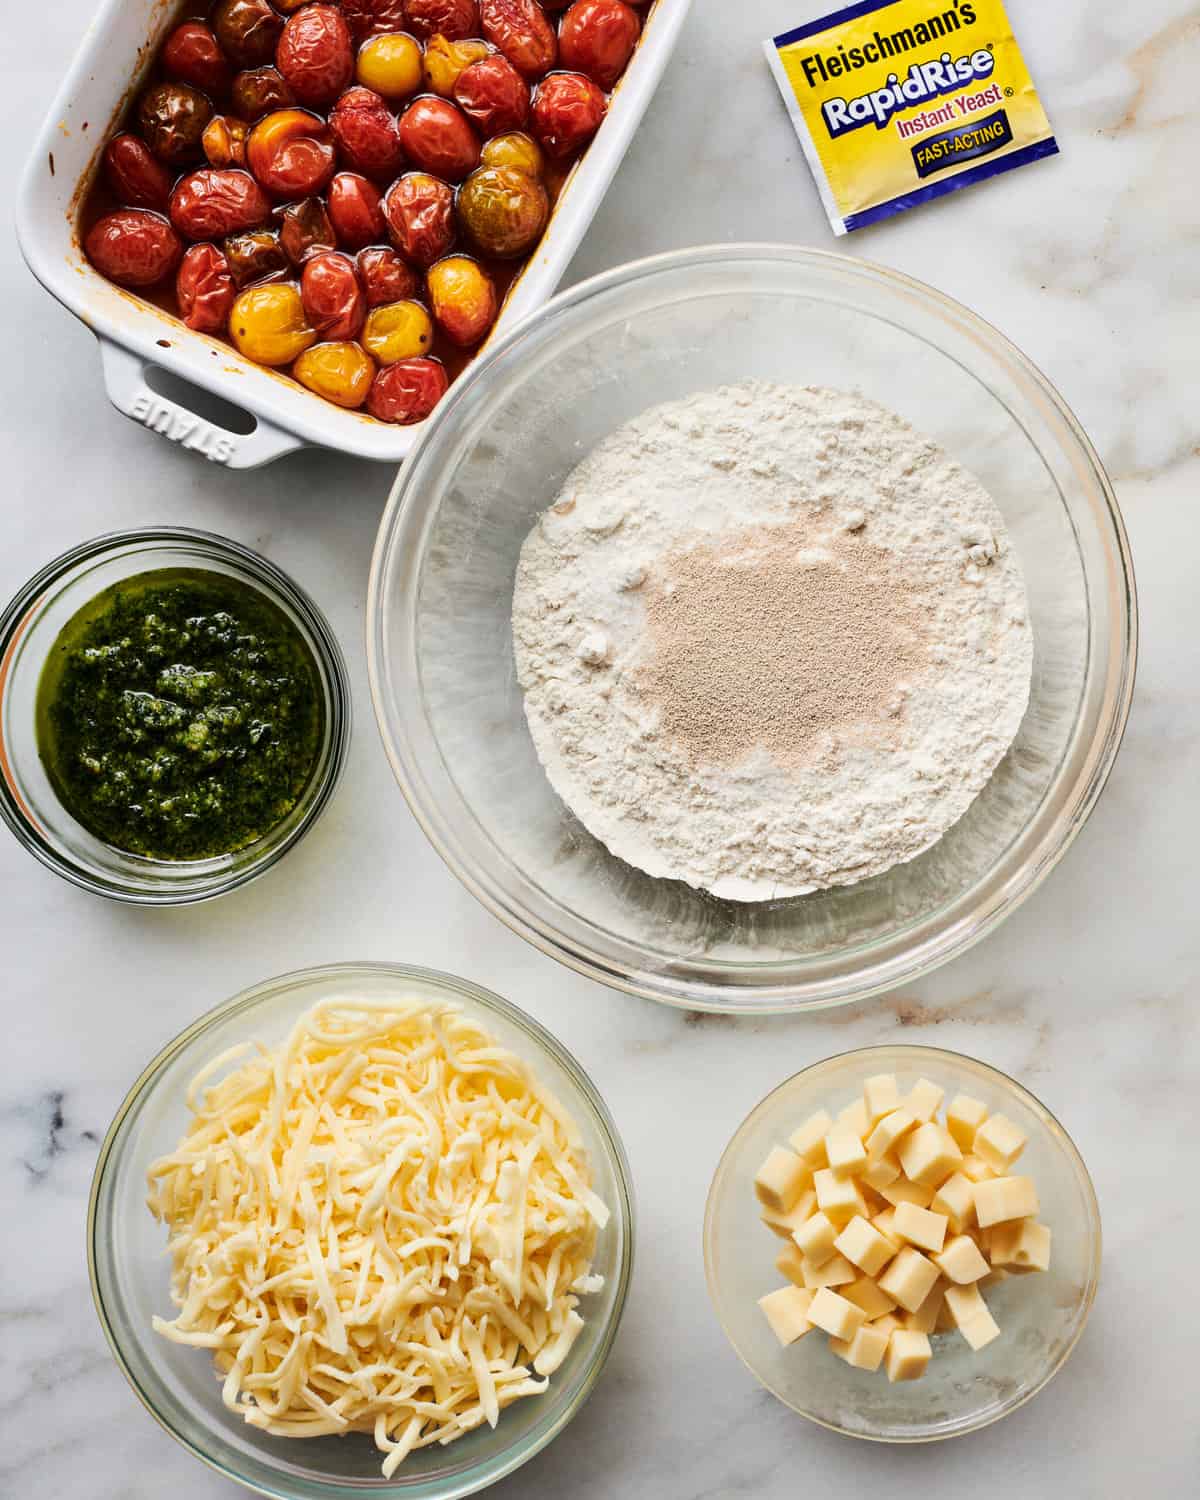 Ingredients for Detroit-Style Pizza